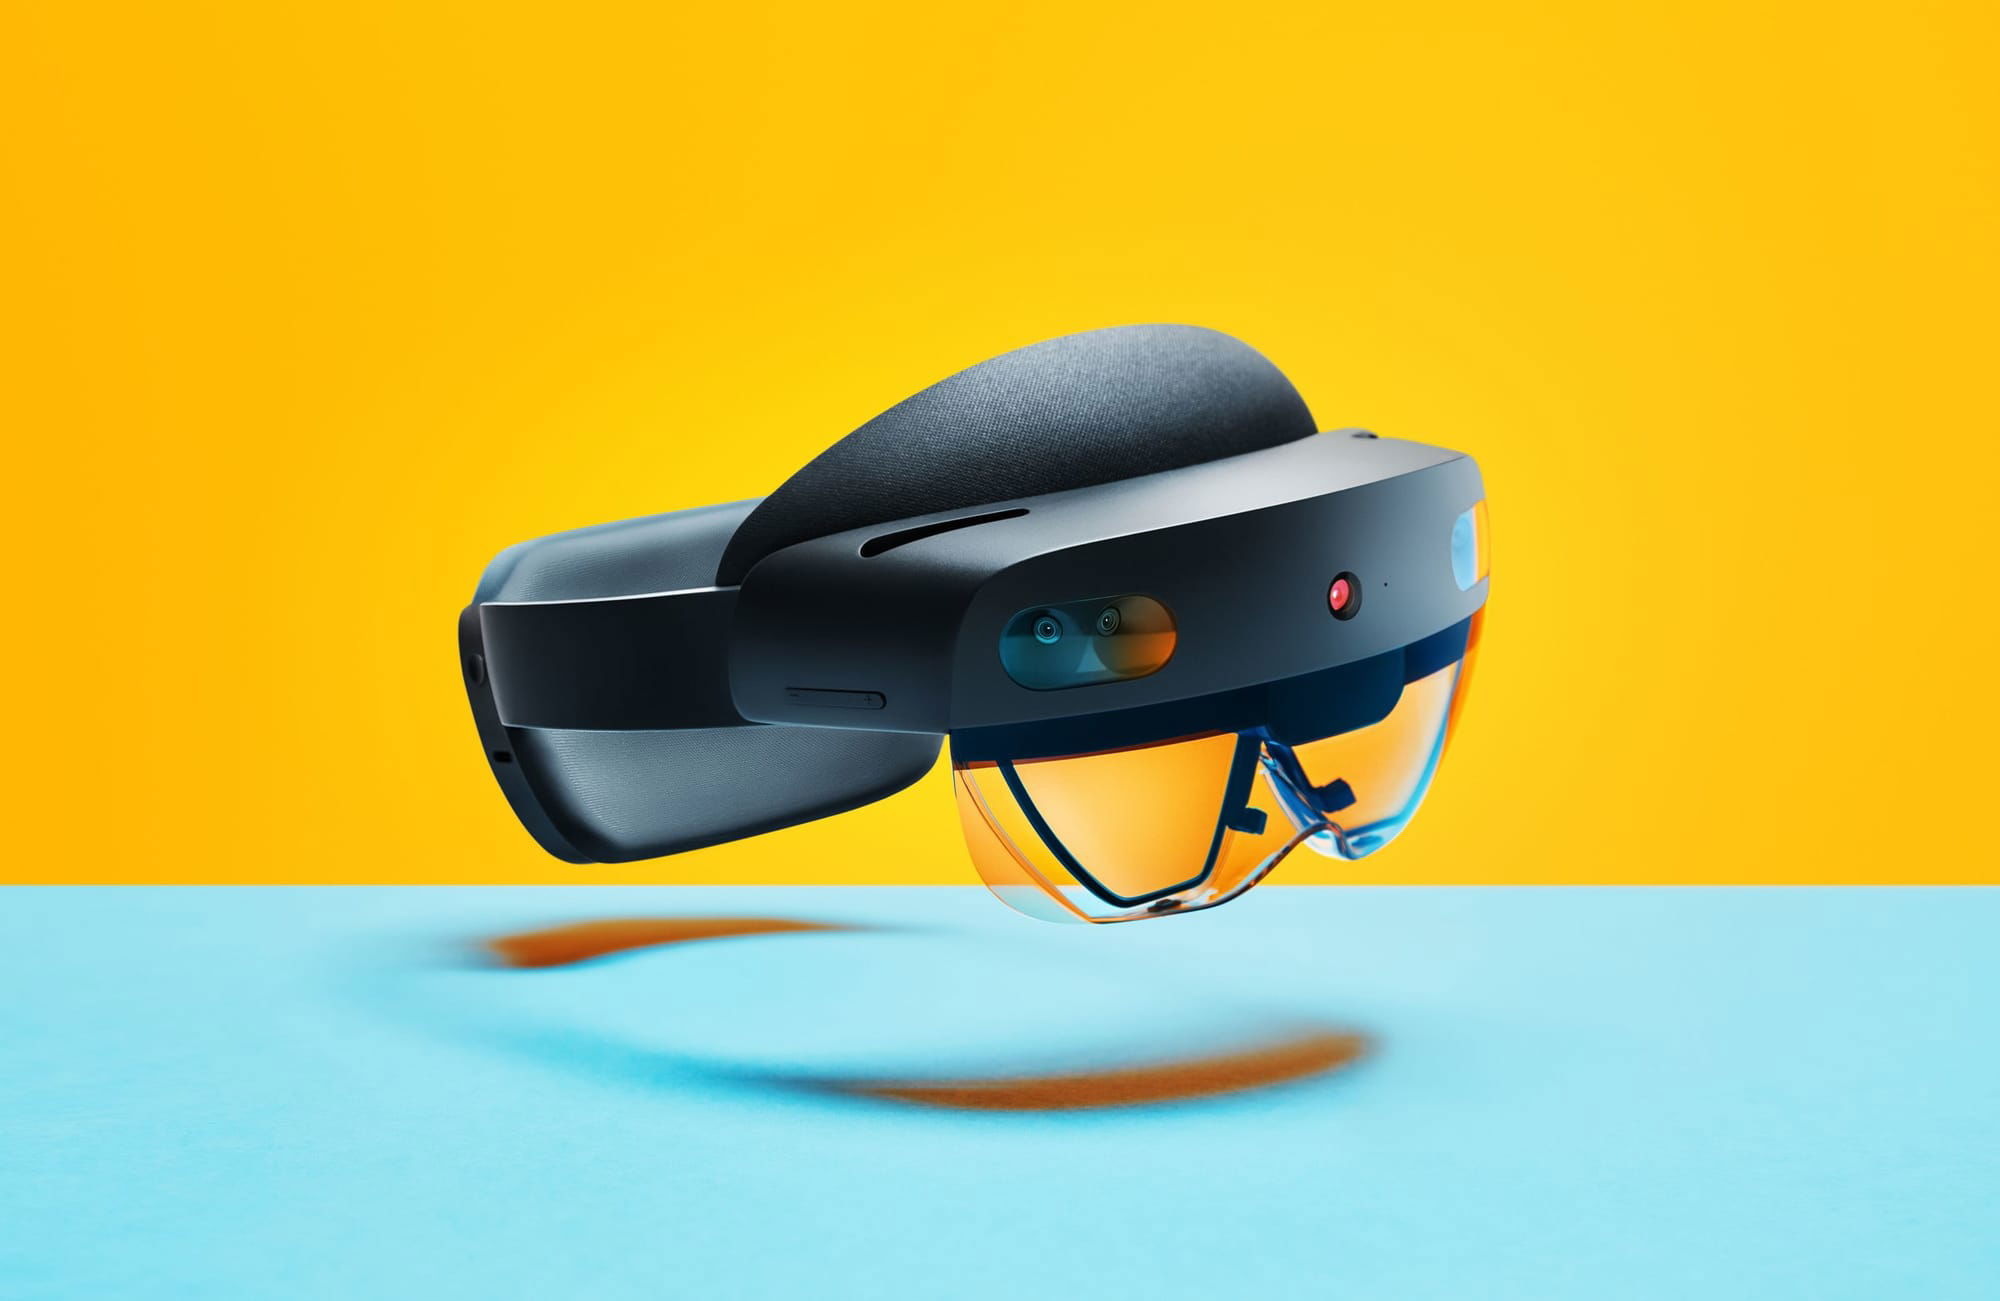 What do we know so far about HoloLens 2?